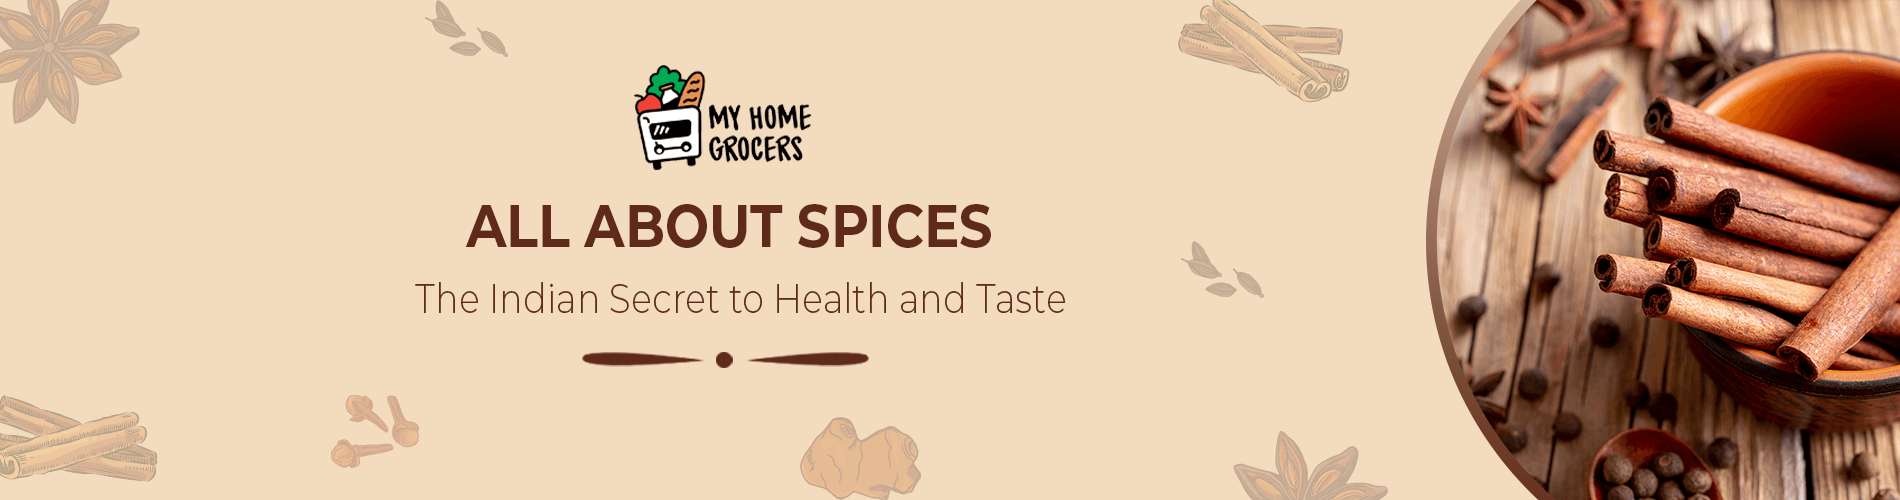 All About Spices- The Indian Secret to Health and Taste